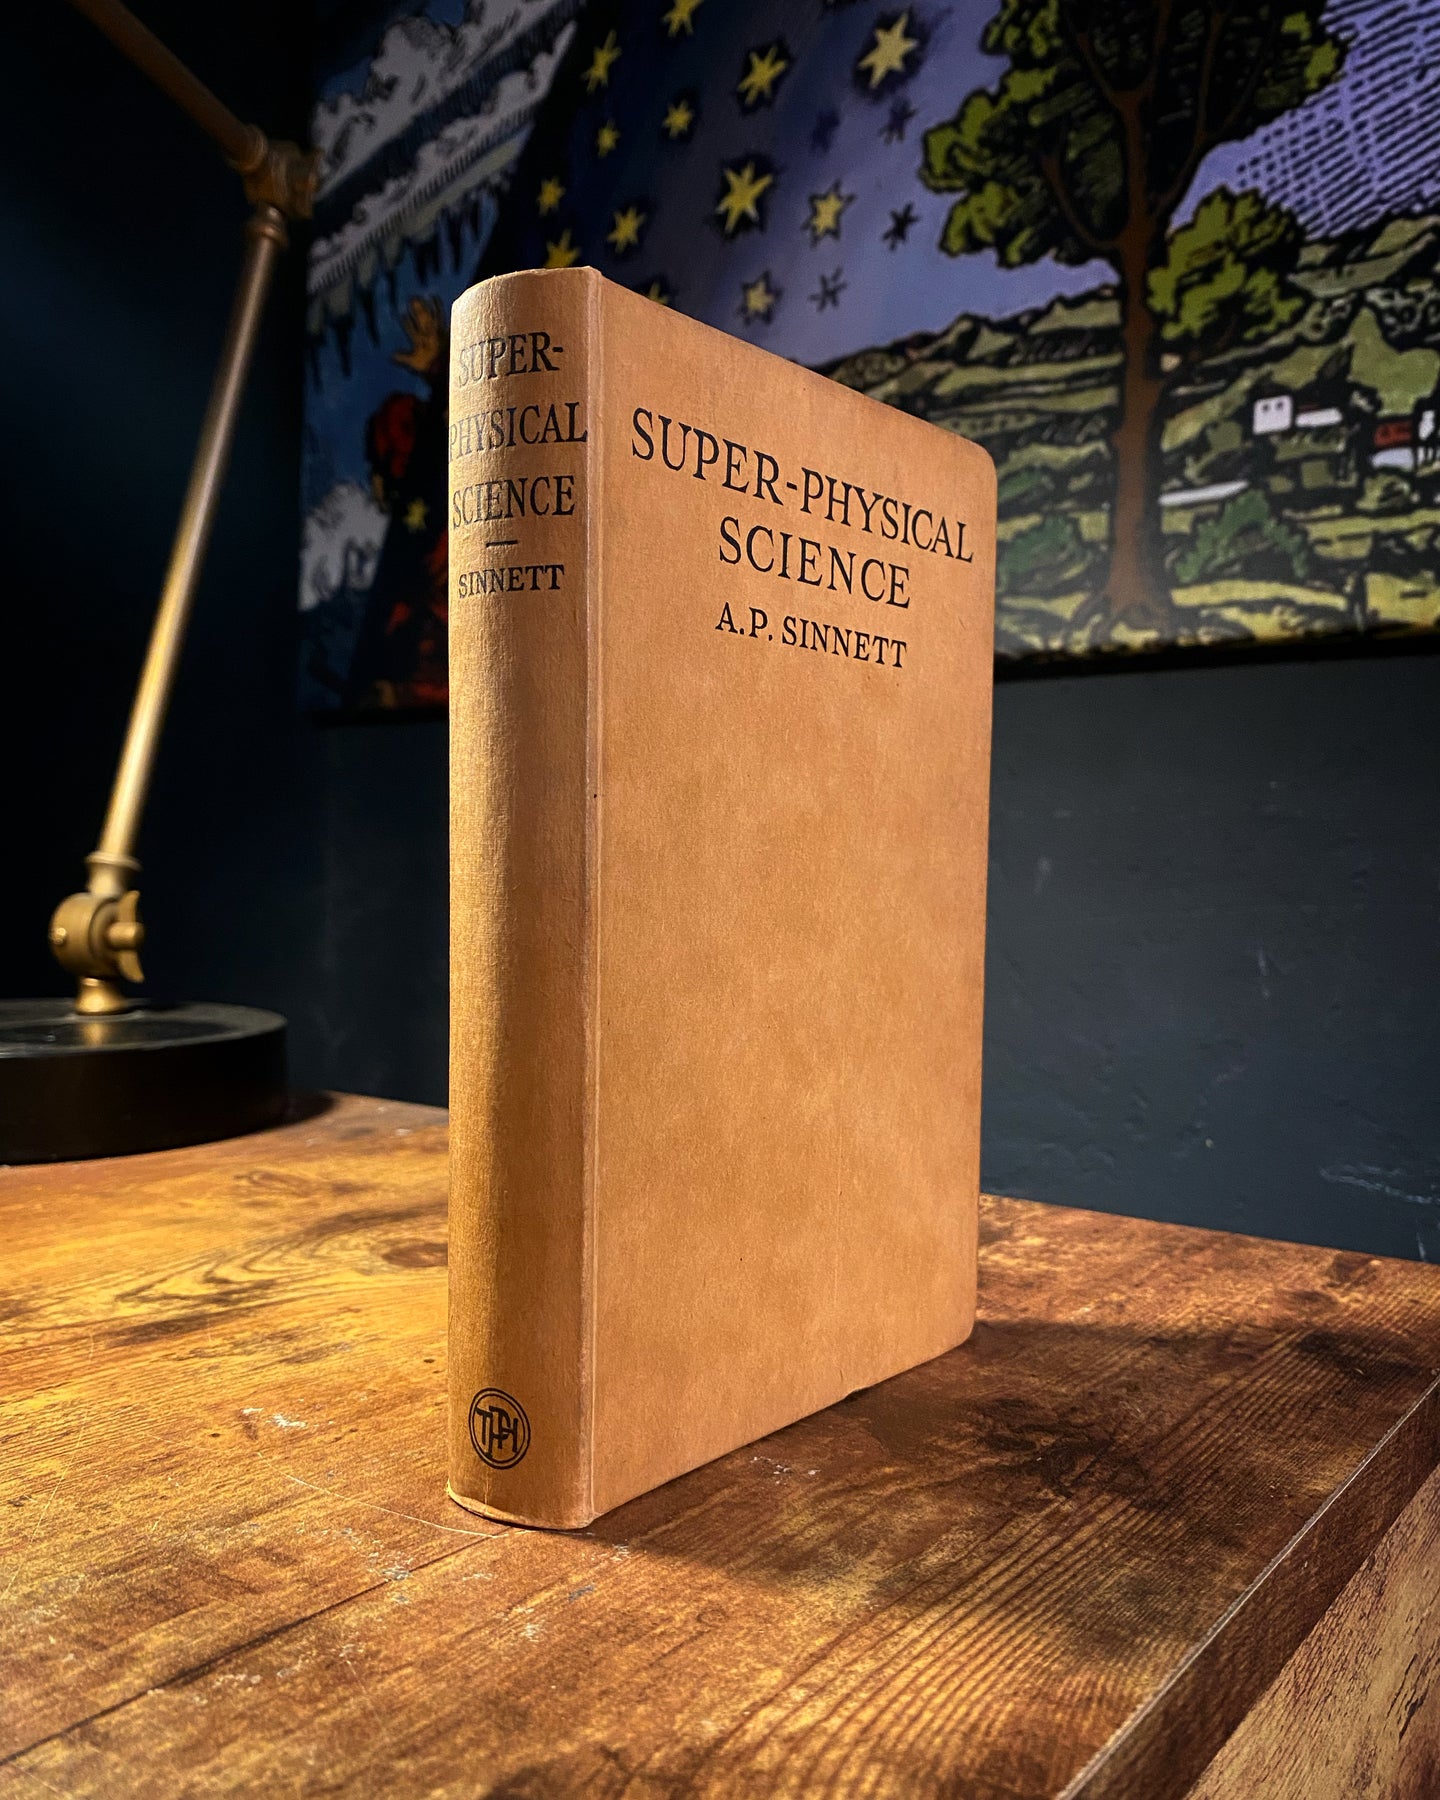 Super-Physical Science by A.P. Sinnett